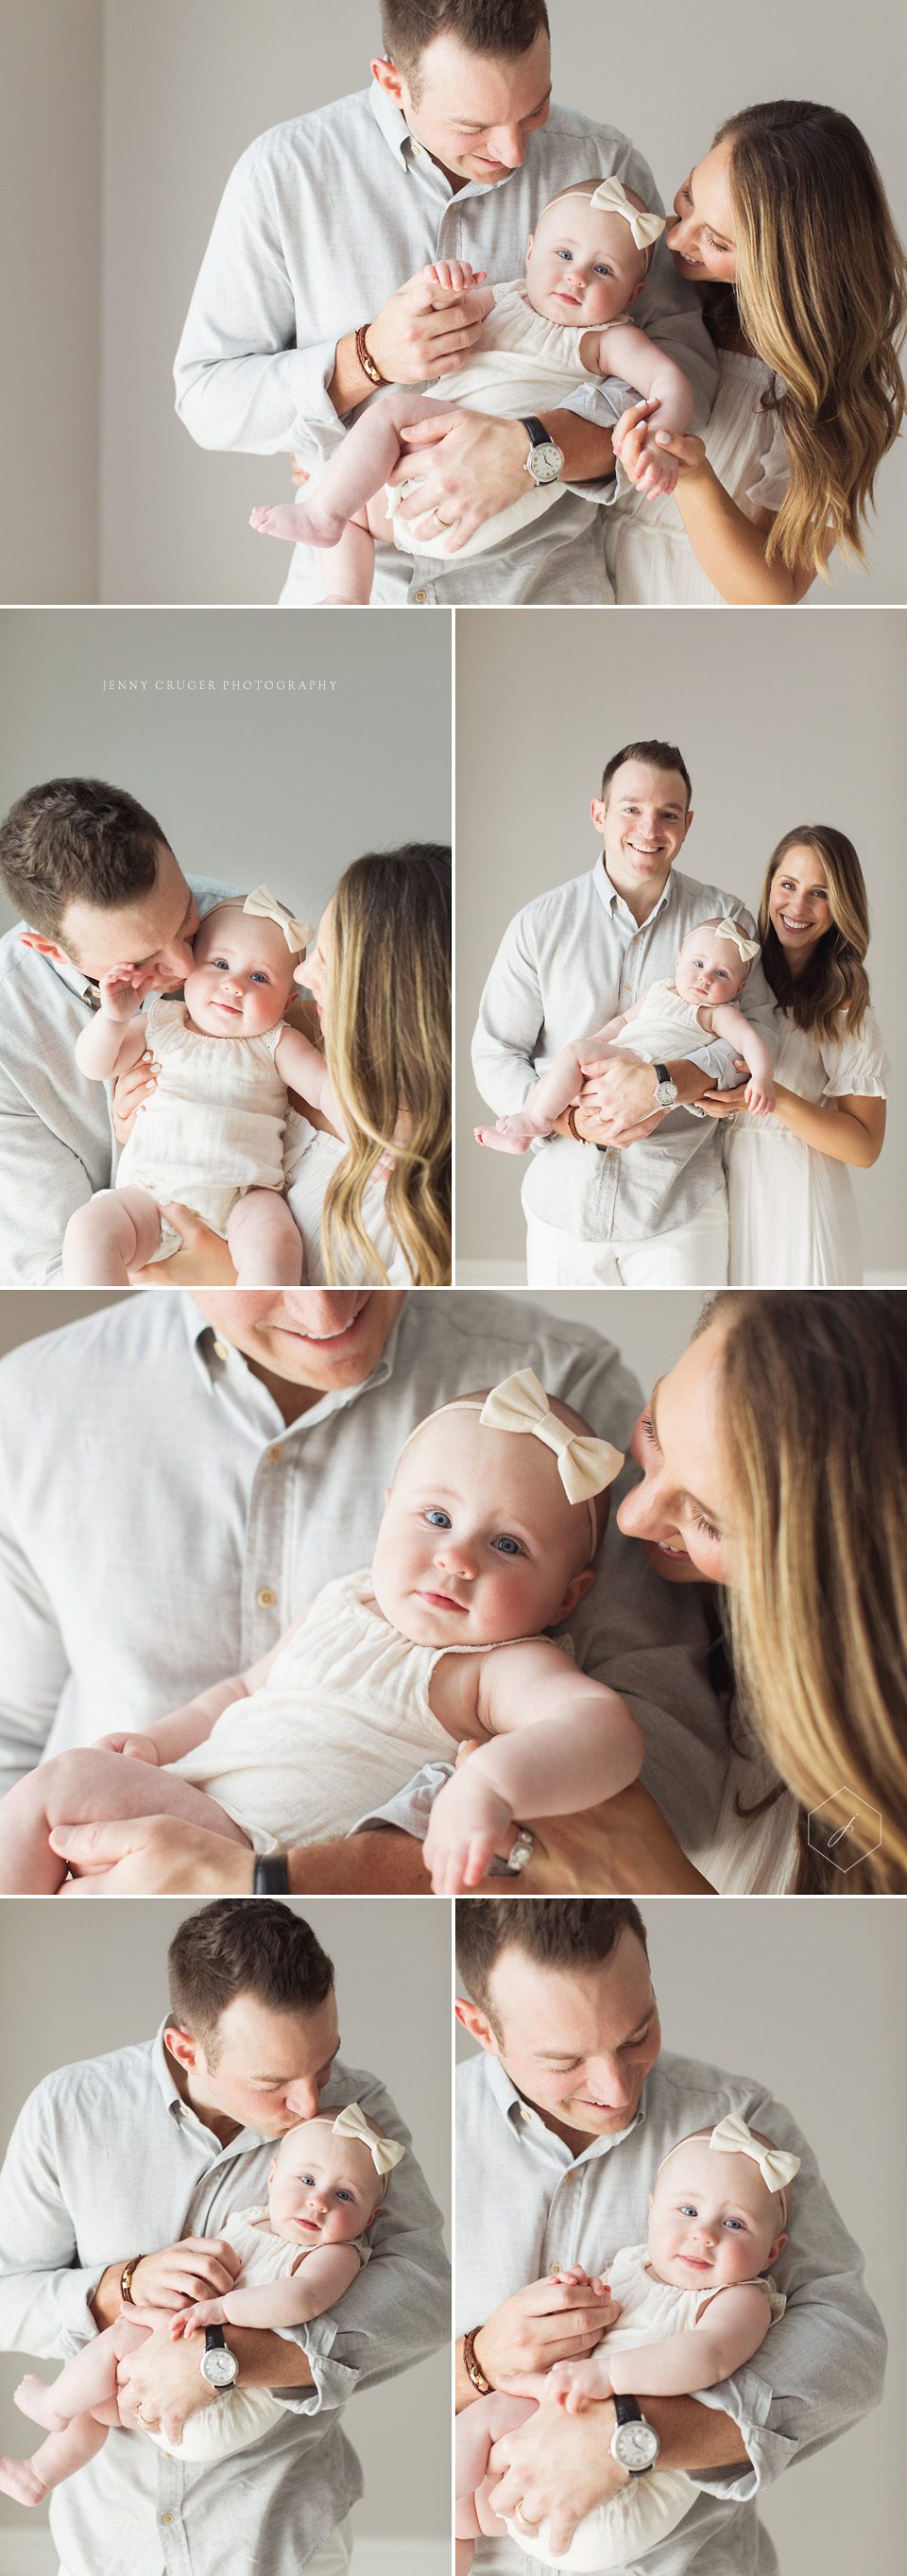 Documenting Baby's First Six Months | Houston Photographer